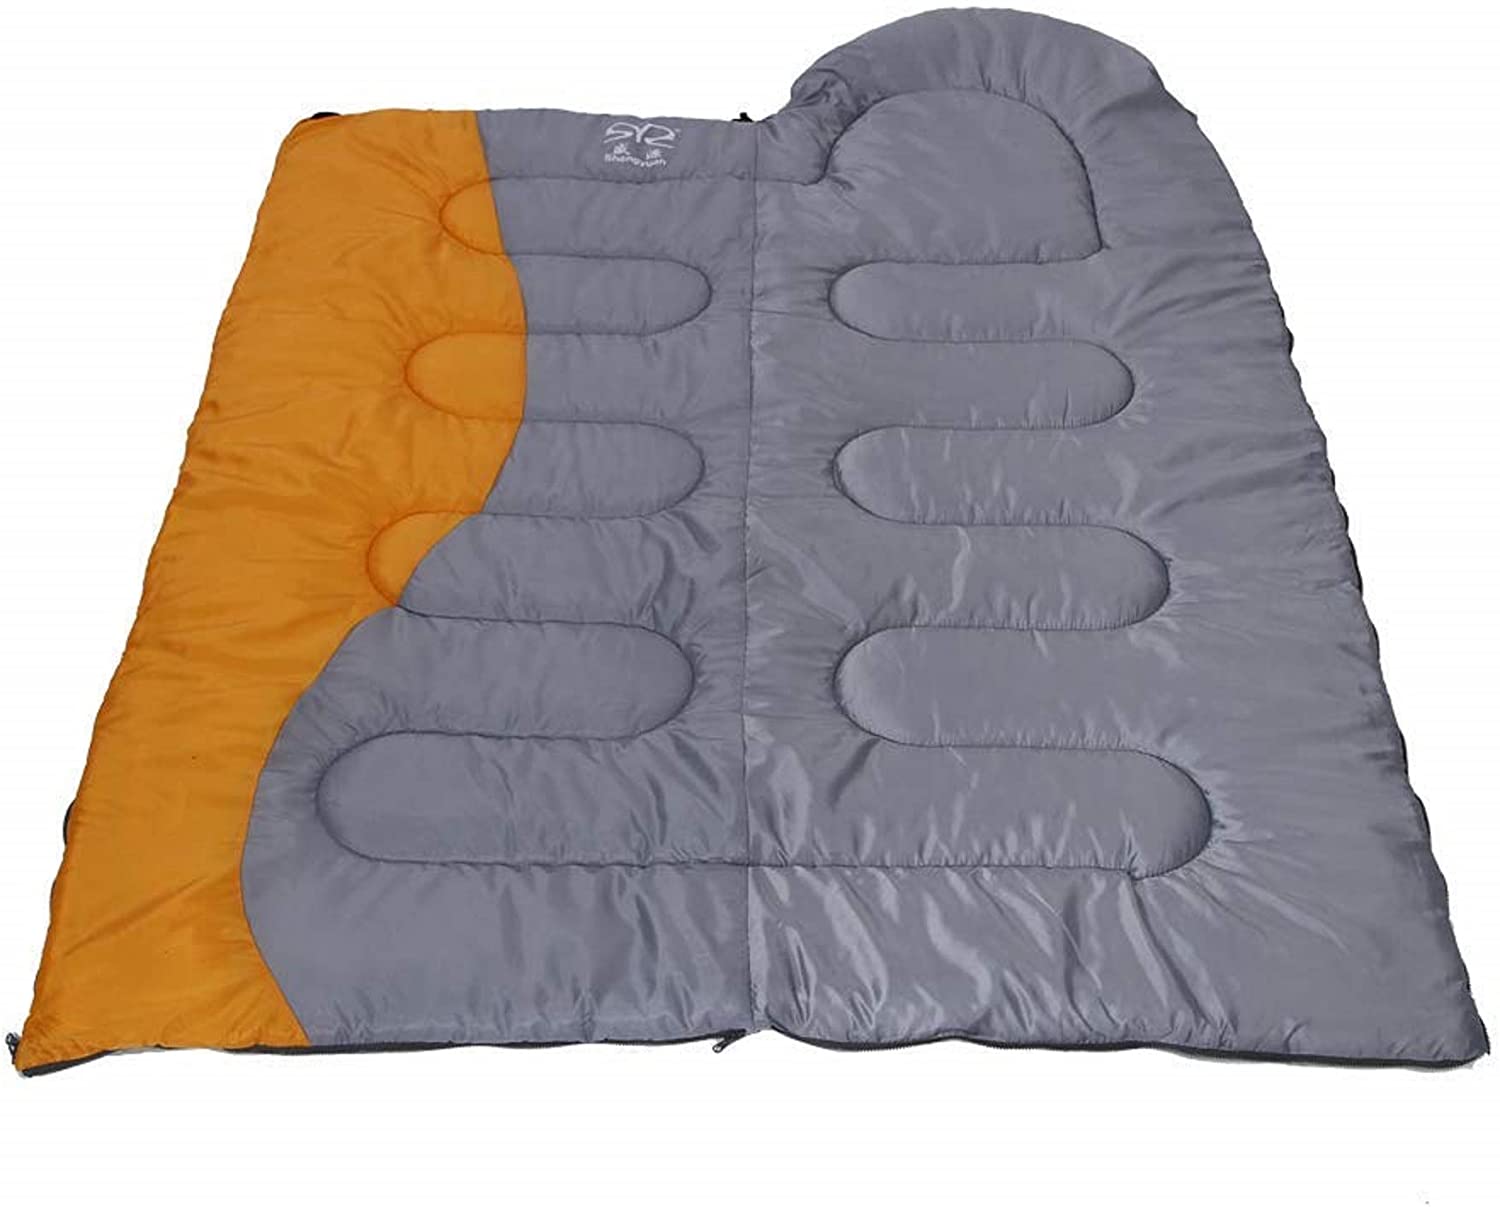 (Out of Stock) Lightweight Portable Waterproof Insulation Sleeping Bag Suit, Orange